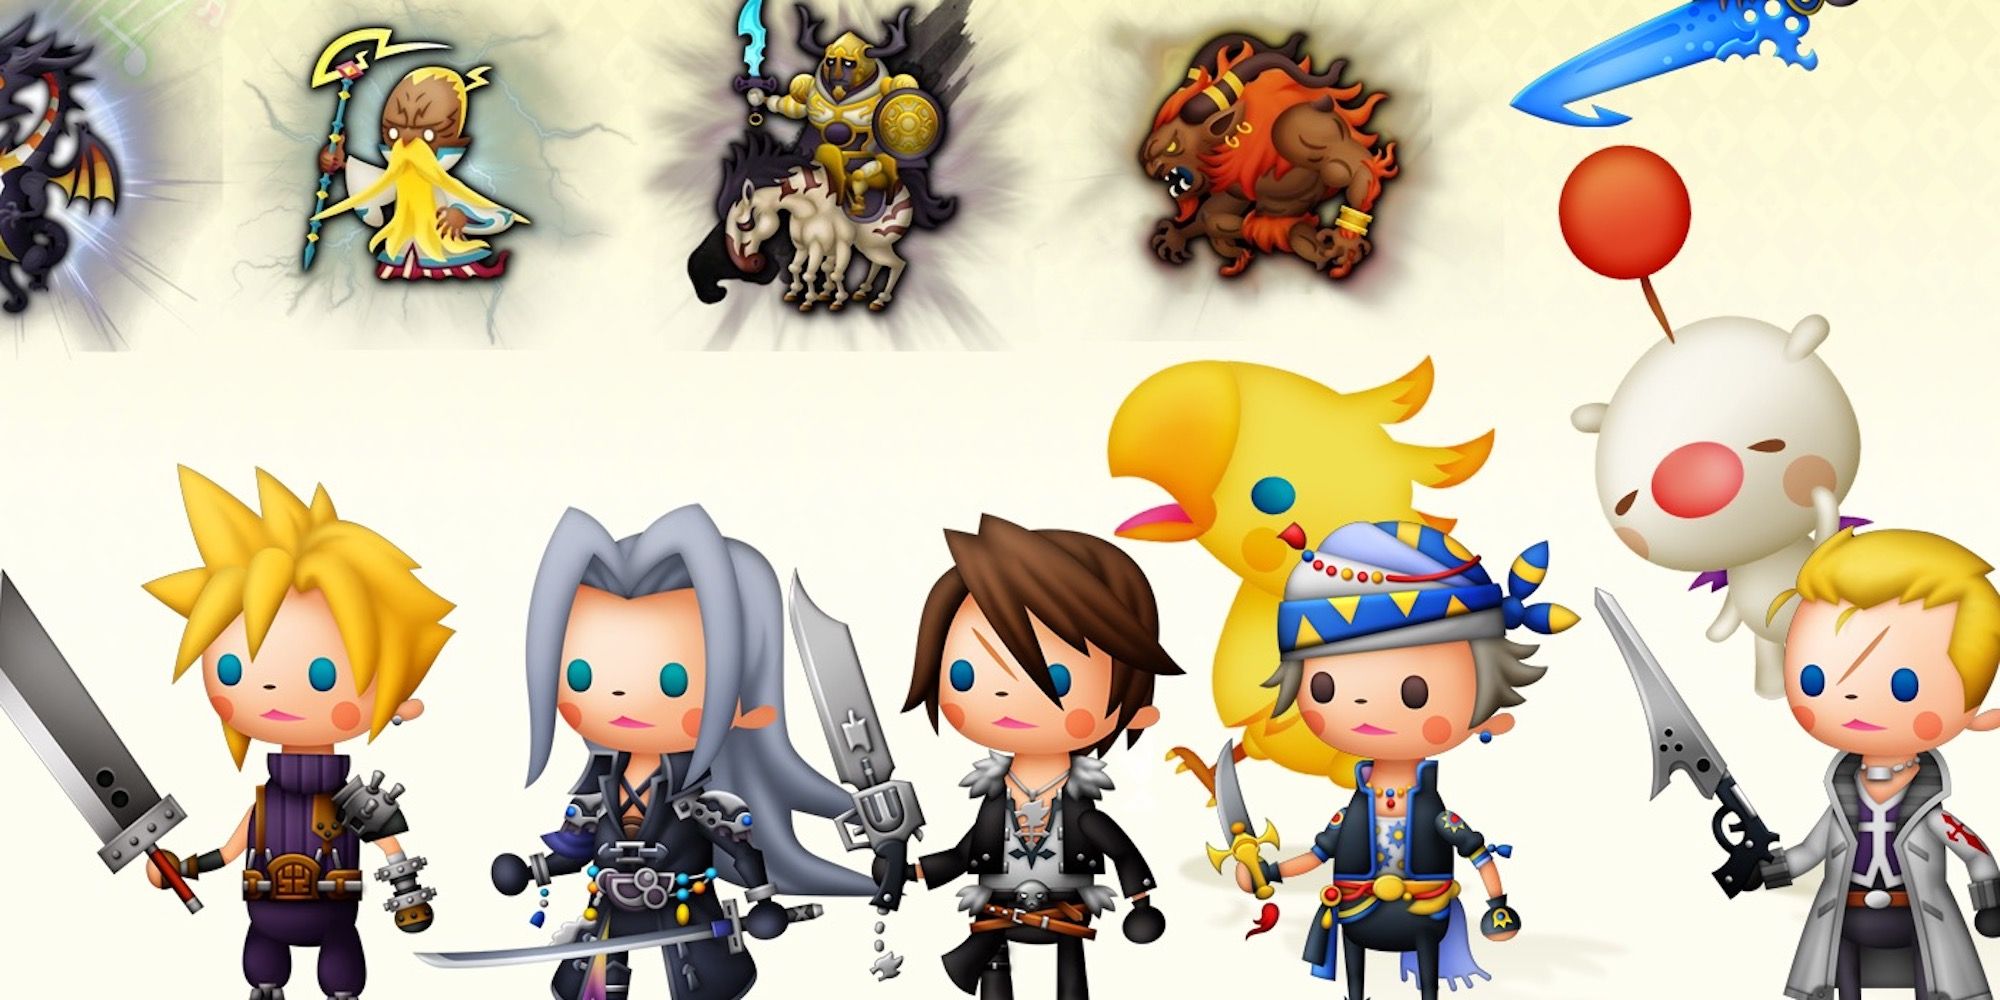 Promo art featuring characters in Theatrhythm Final Fantasy